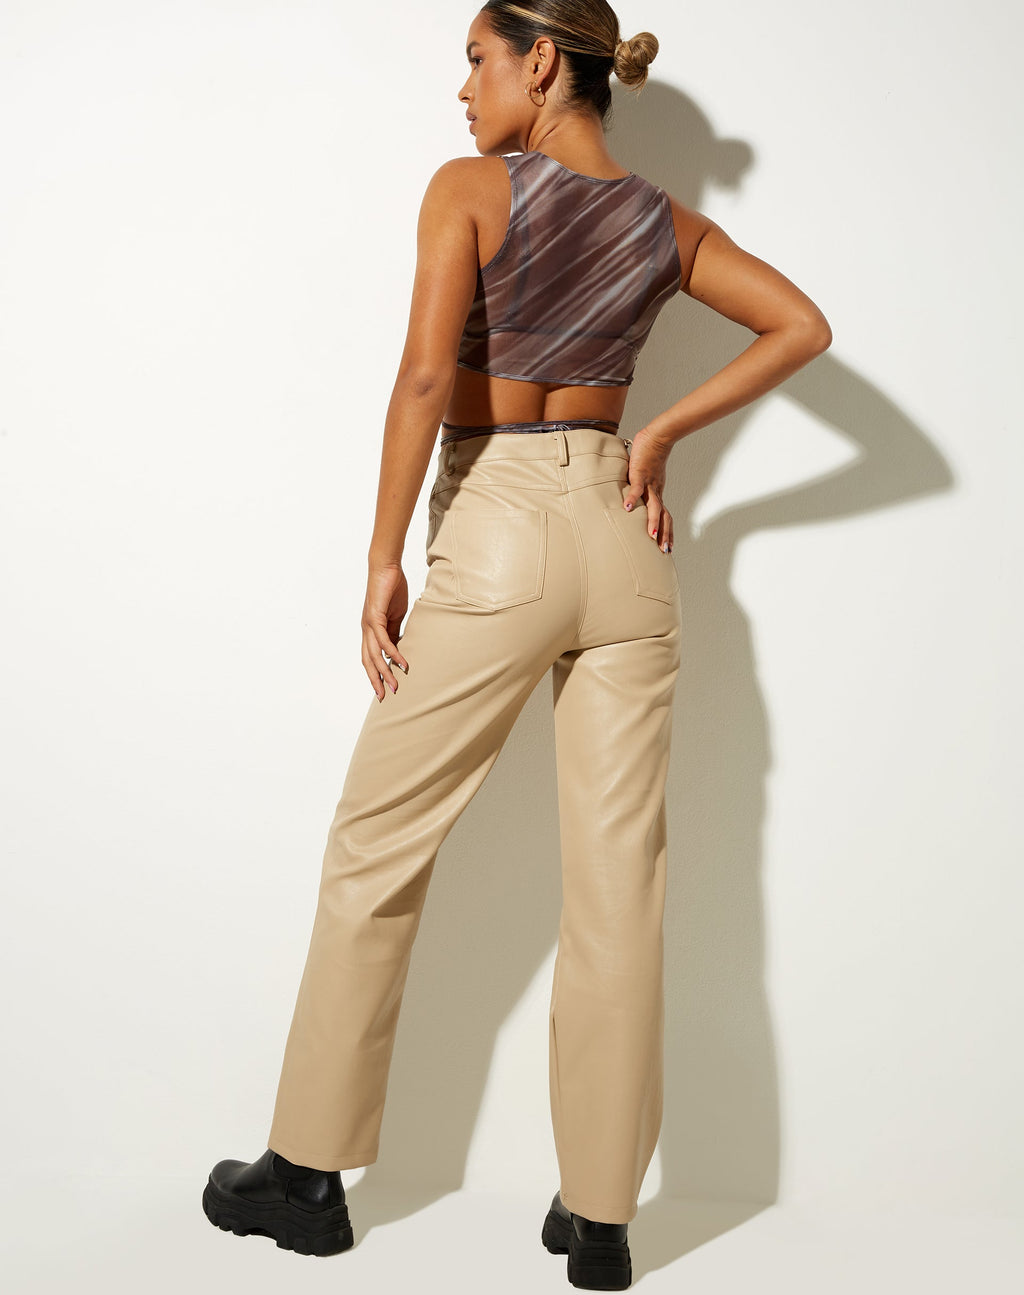 Cleo Crop Top in Ripple Chocolate